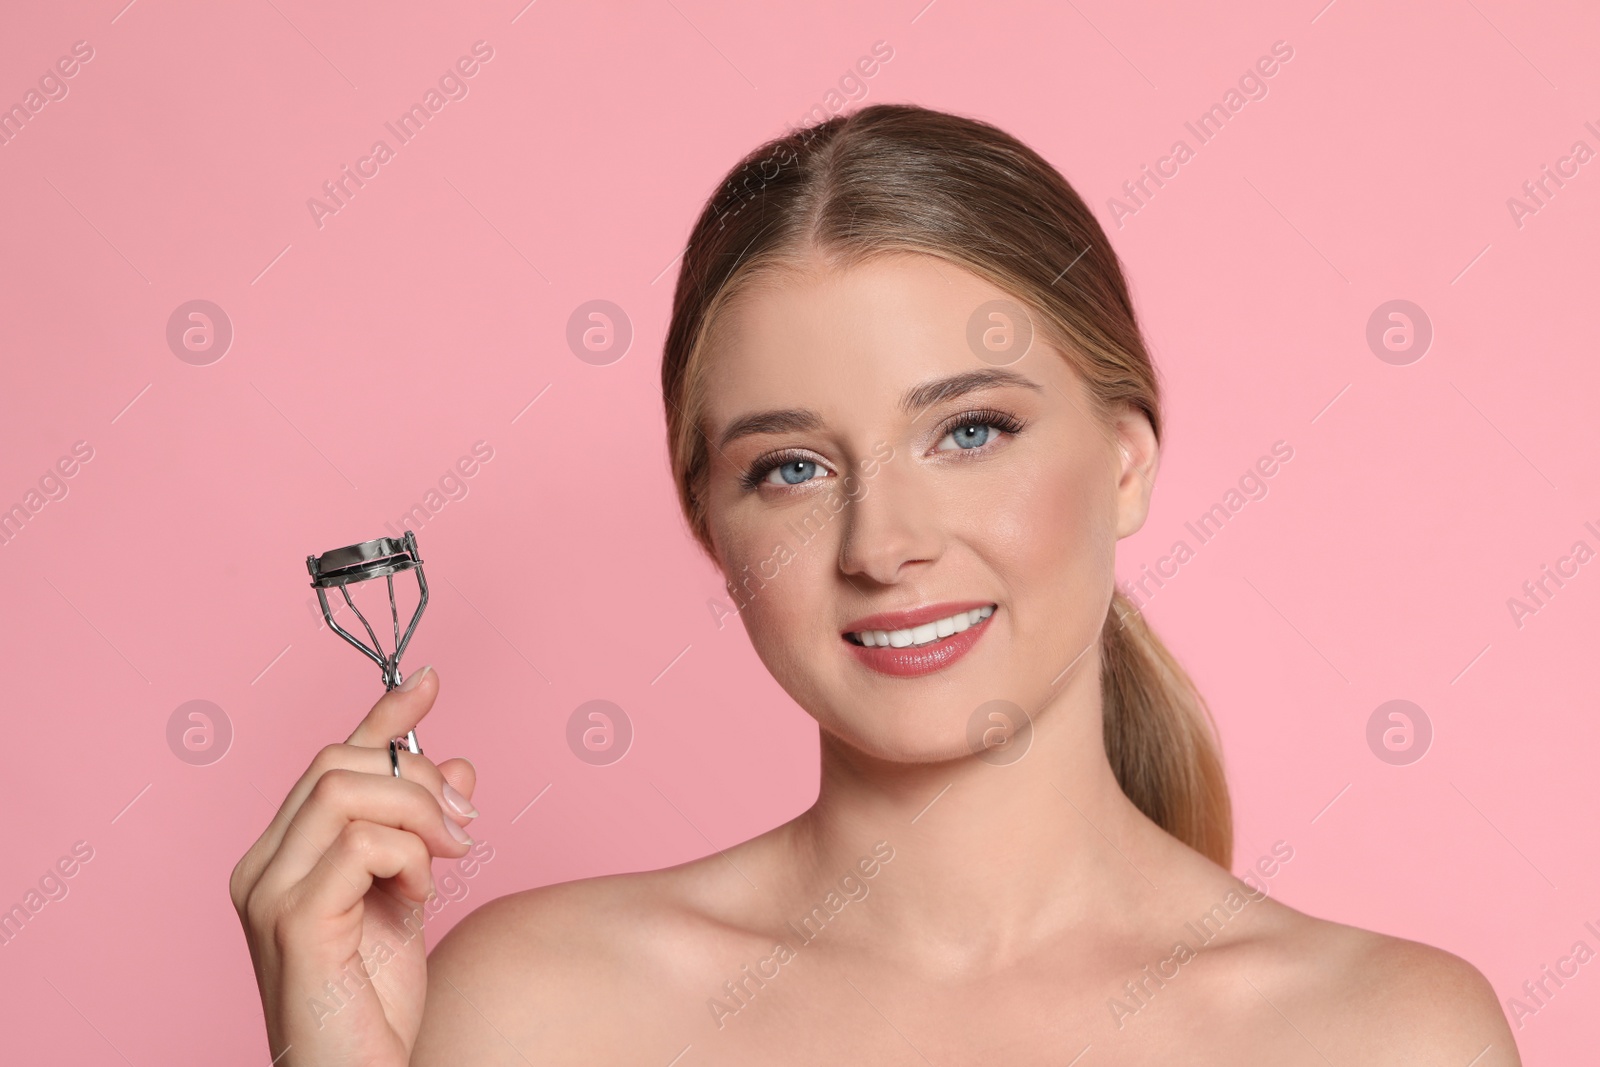 Photo of Young woman with eyelash curler on pink background